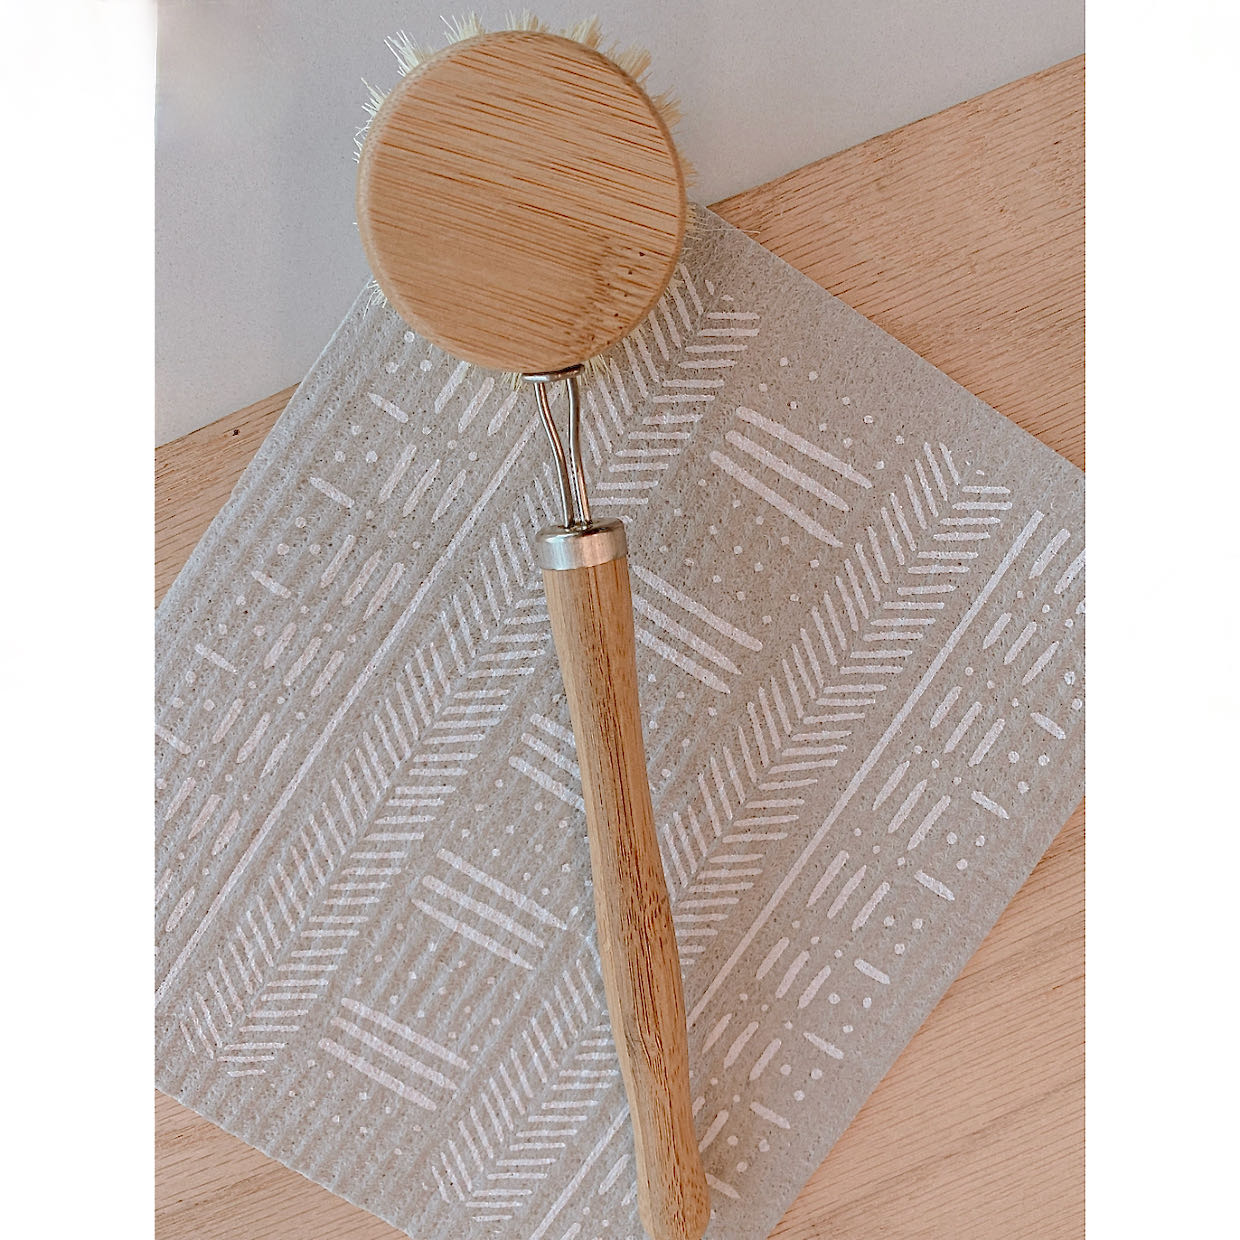 Long Handled Dish Scrubbing Brush PLUS Extra Replaceable Head Sustainable Farmhouse Kitchen - C